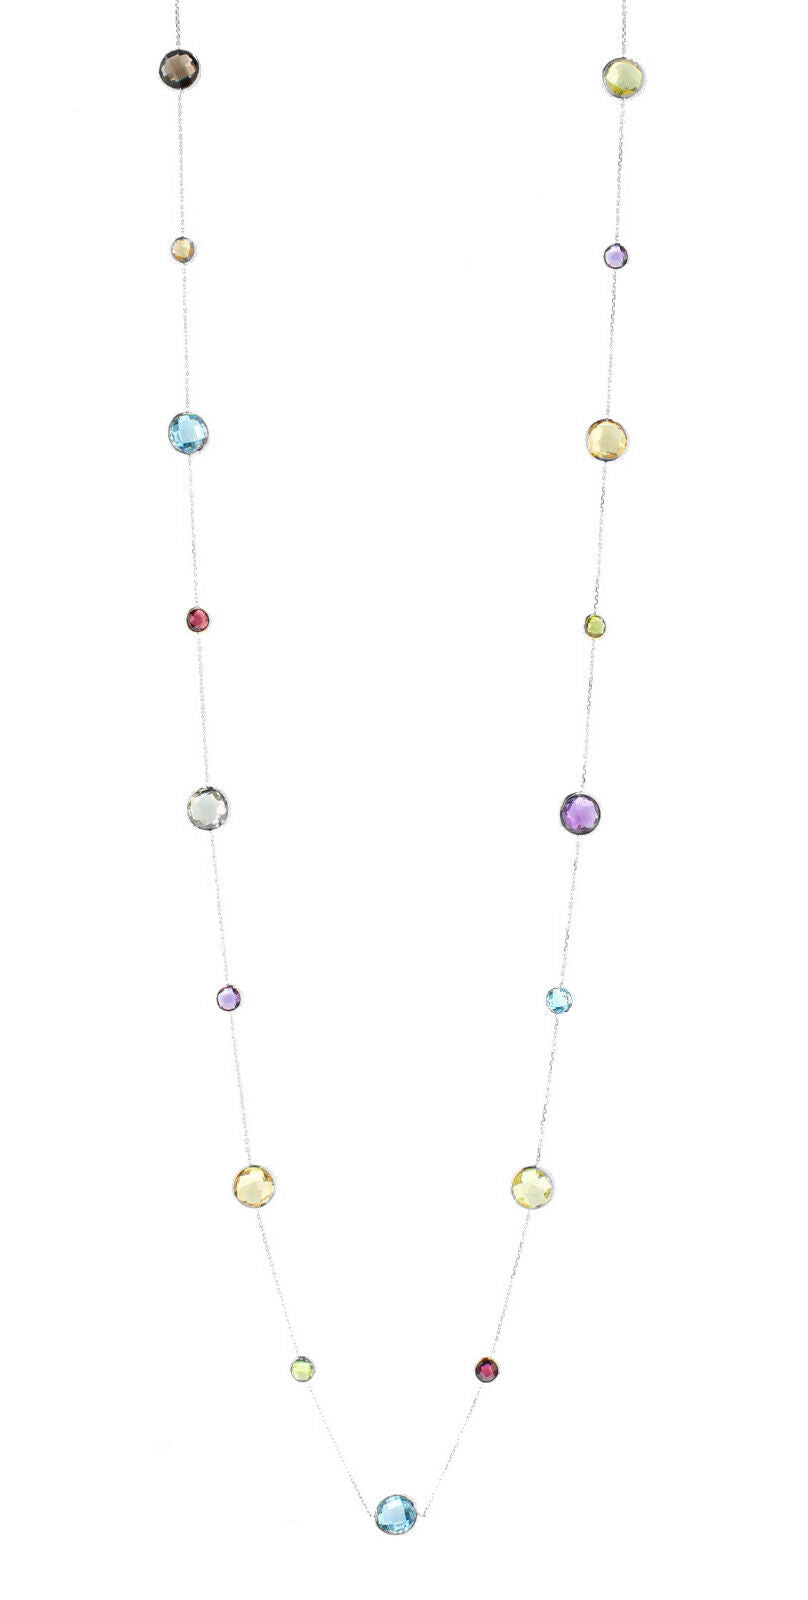 14K White Gold Necklace With Round Shaped Gemstones 36 Inches